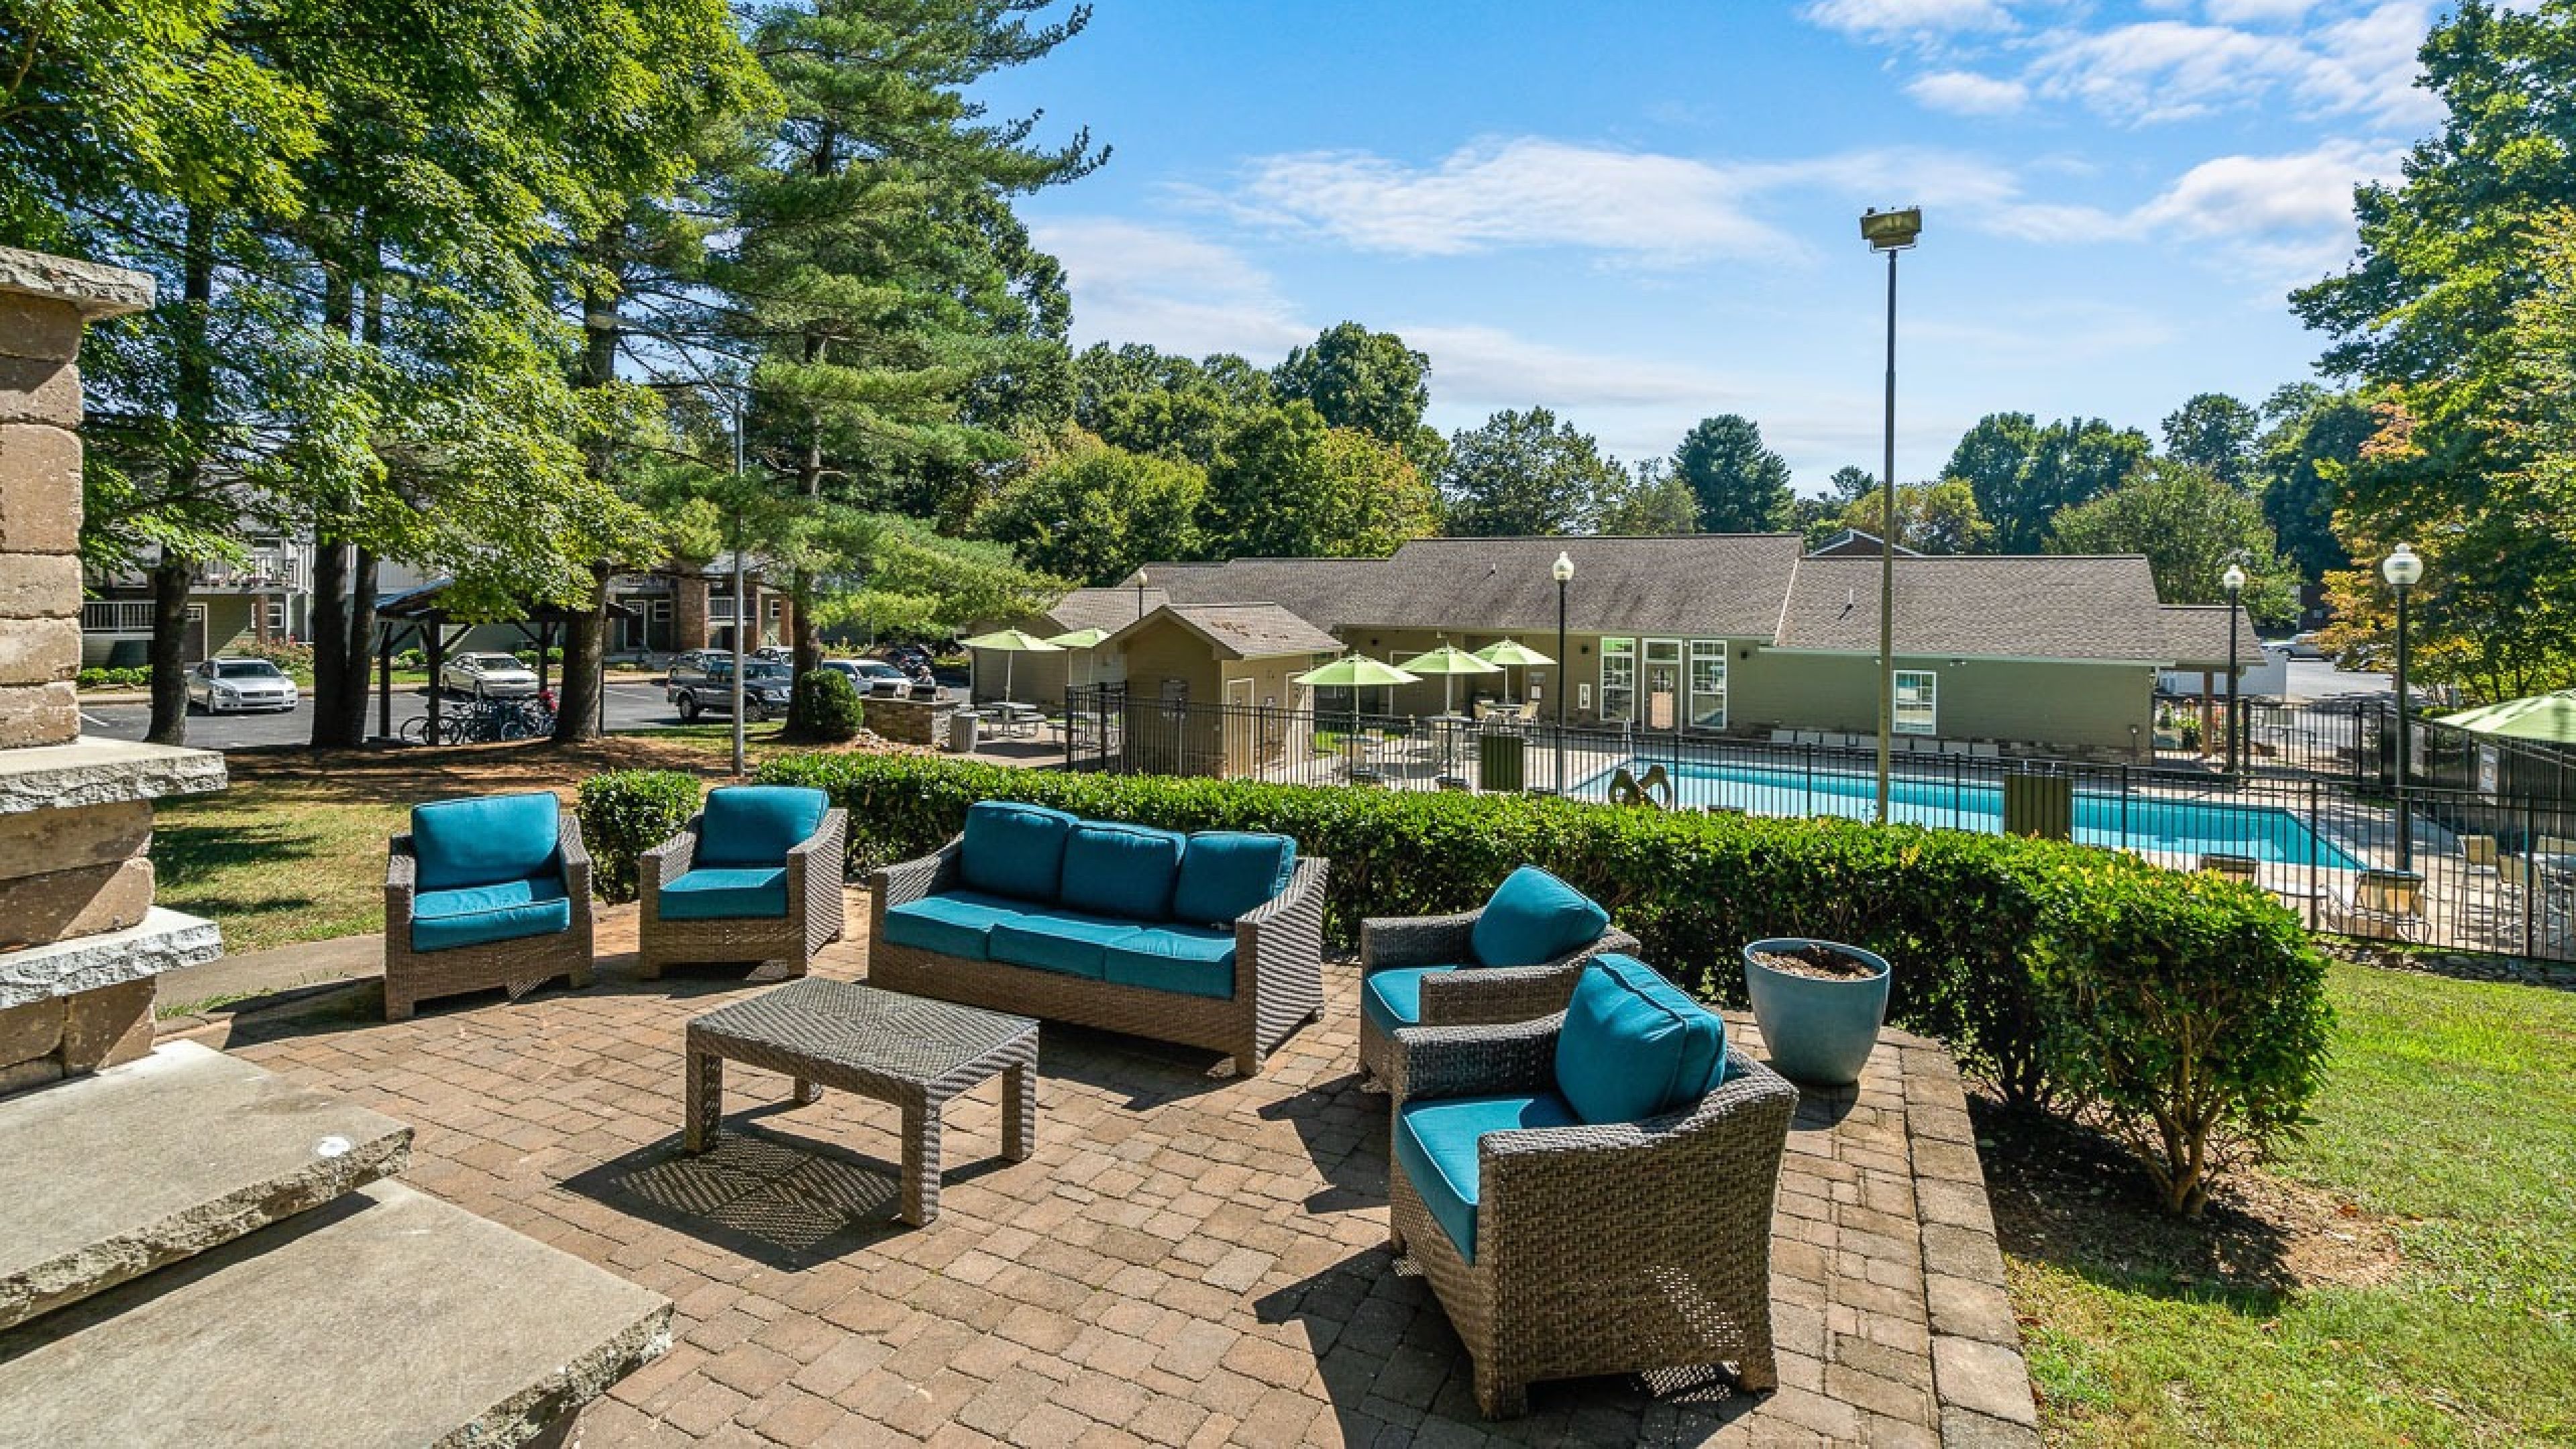 Hawthorne at Bear Creek outdoor amenity area with large patio overlooking the outdoor pool